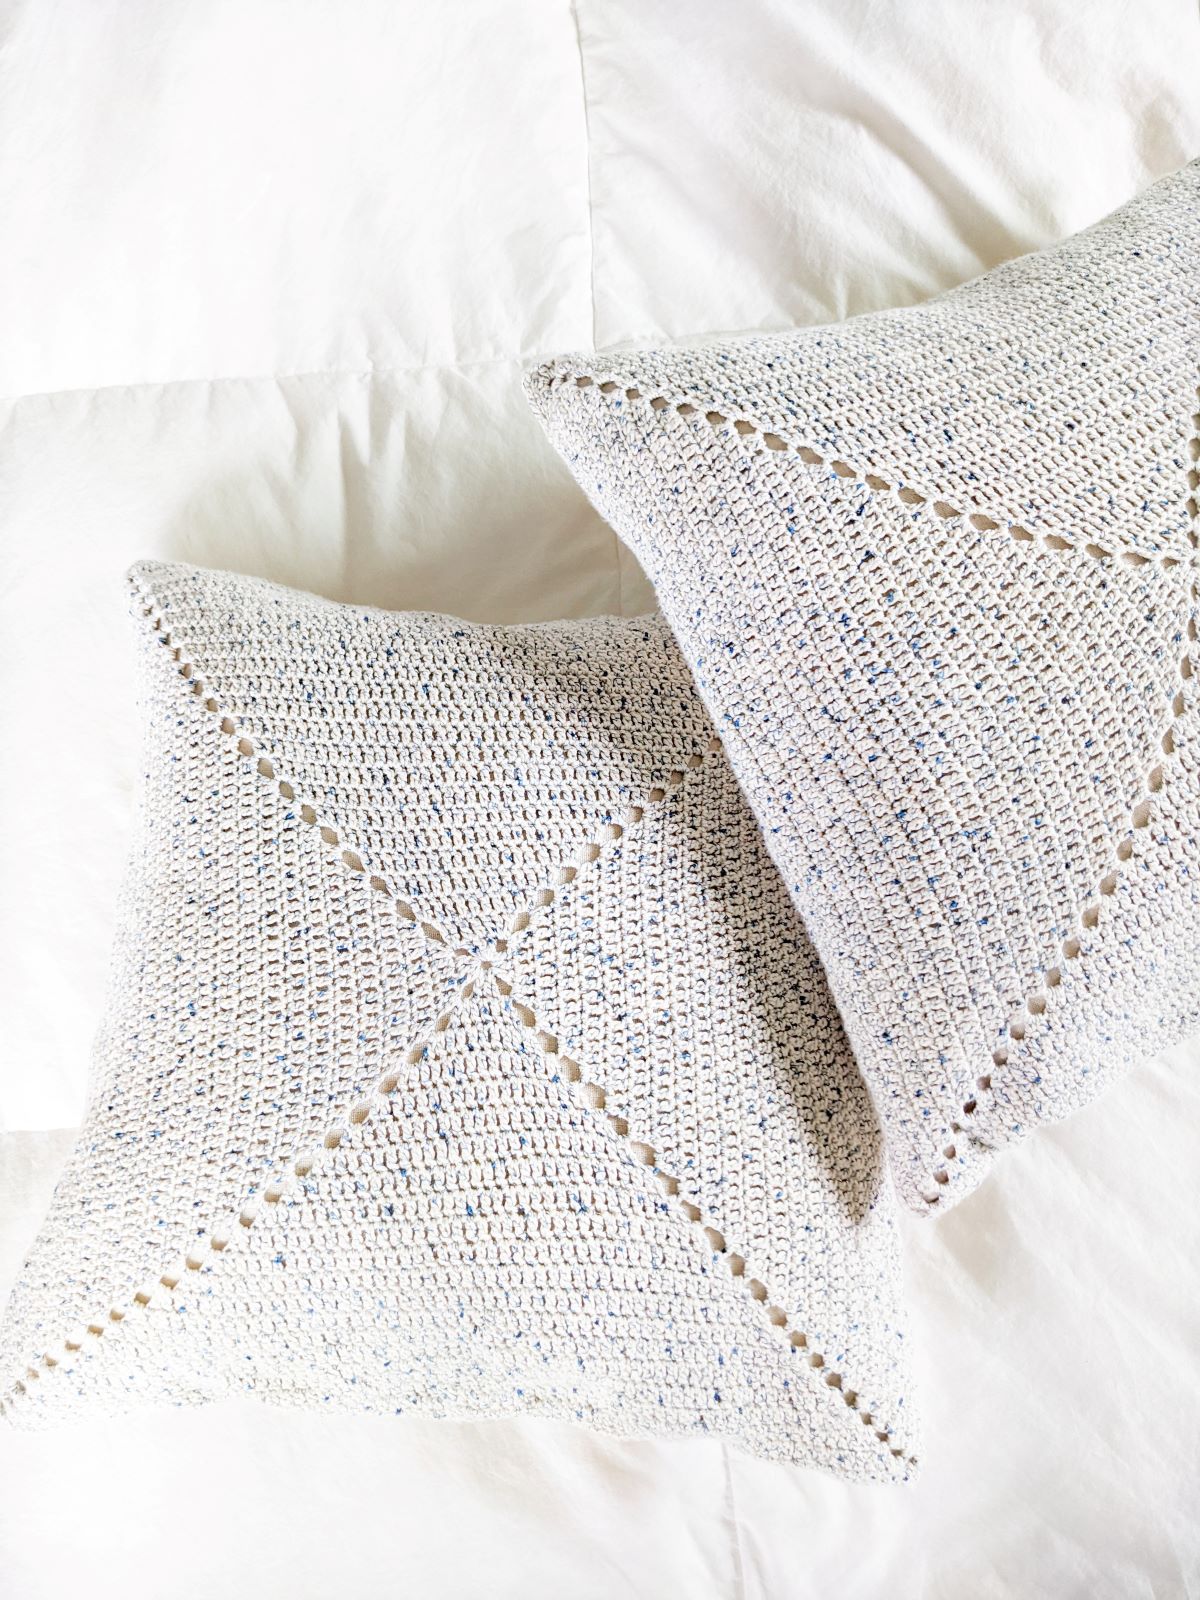 2 double crochet granny square pillows on a bed